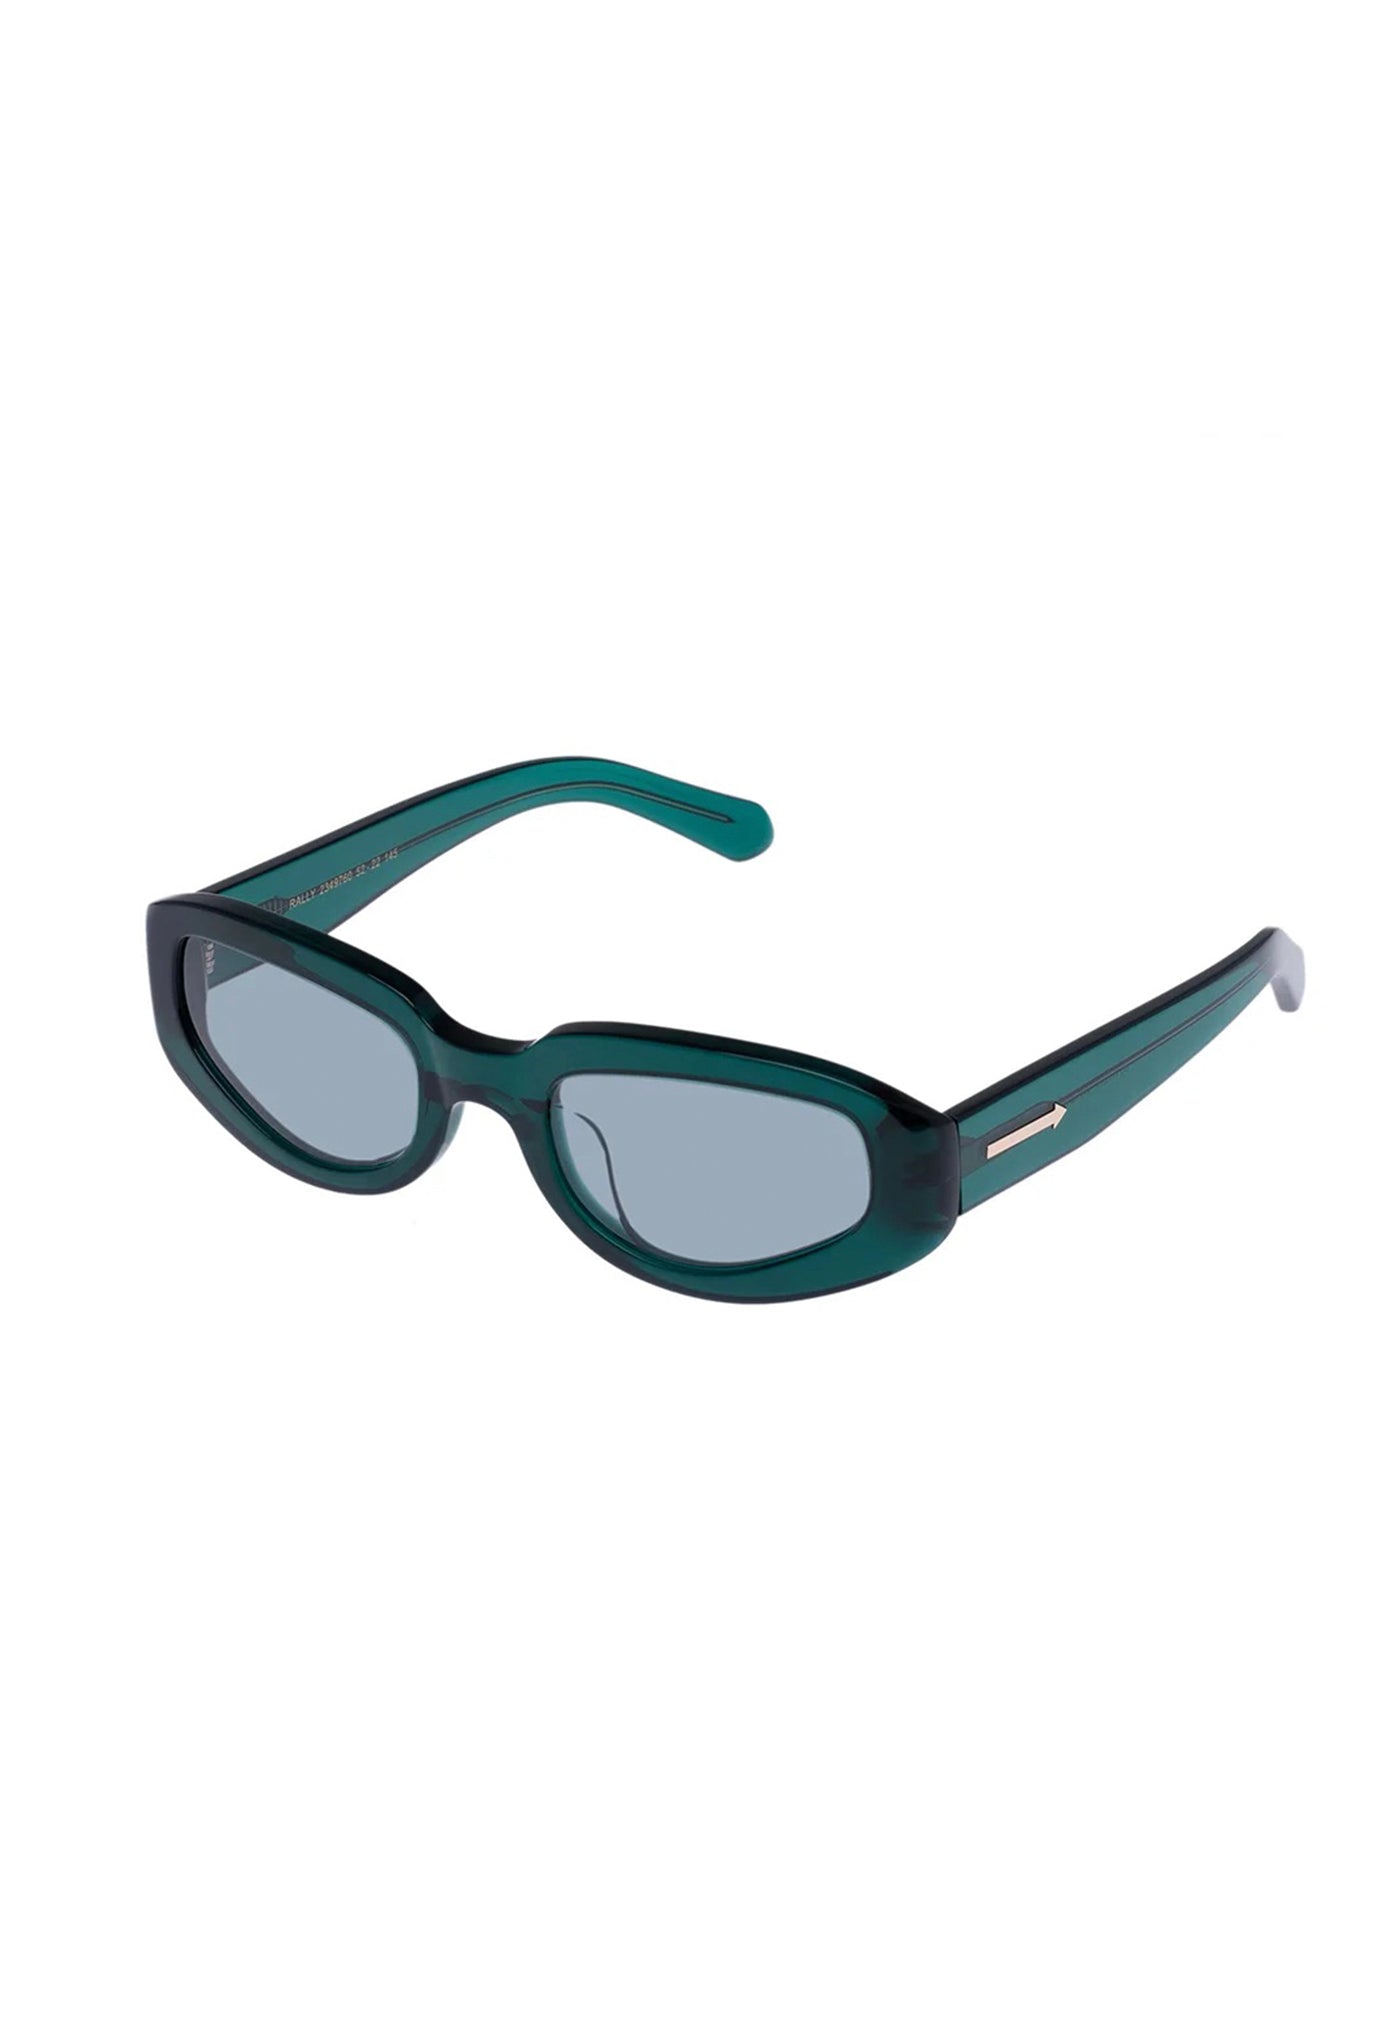 Rally Sunglasses - Emerald sold by Angel Divine